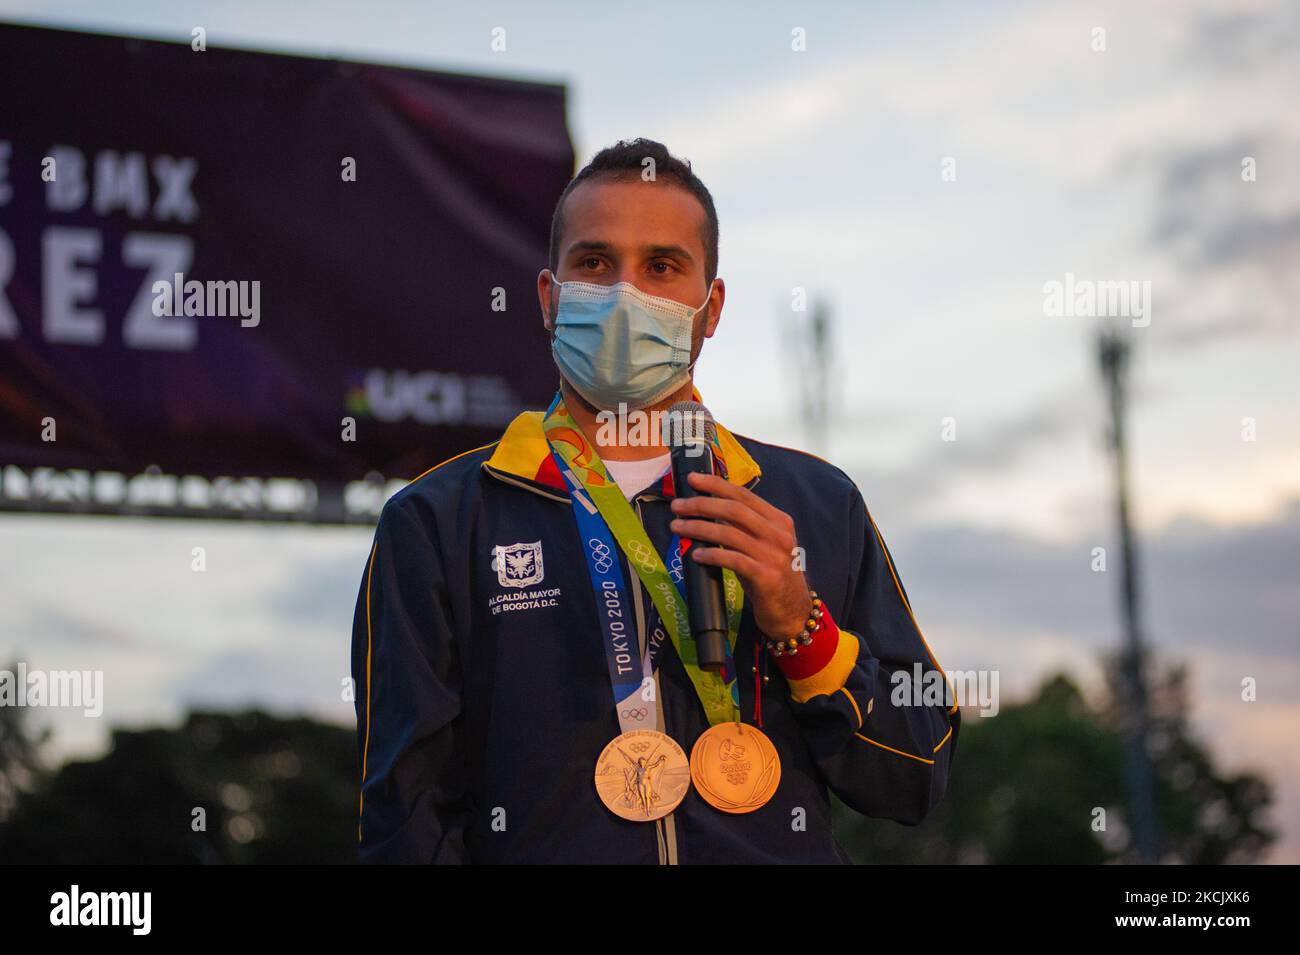 Carlos Ramirez speaks live to the press during the name inauguration of the Carlos Ramirez BMX track named after Carlos Ramirez bronze Olympic Medal winner during the Tokyo 2020+1 Olympics, in Bogota, Colombia, on August 18, 2021. (Photo by Sebastian Barros/NurPhoto) Stock Photo